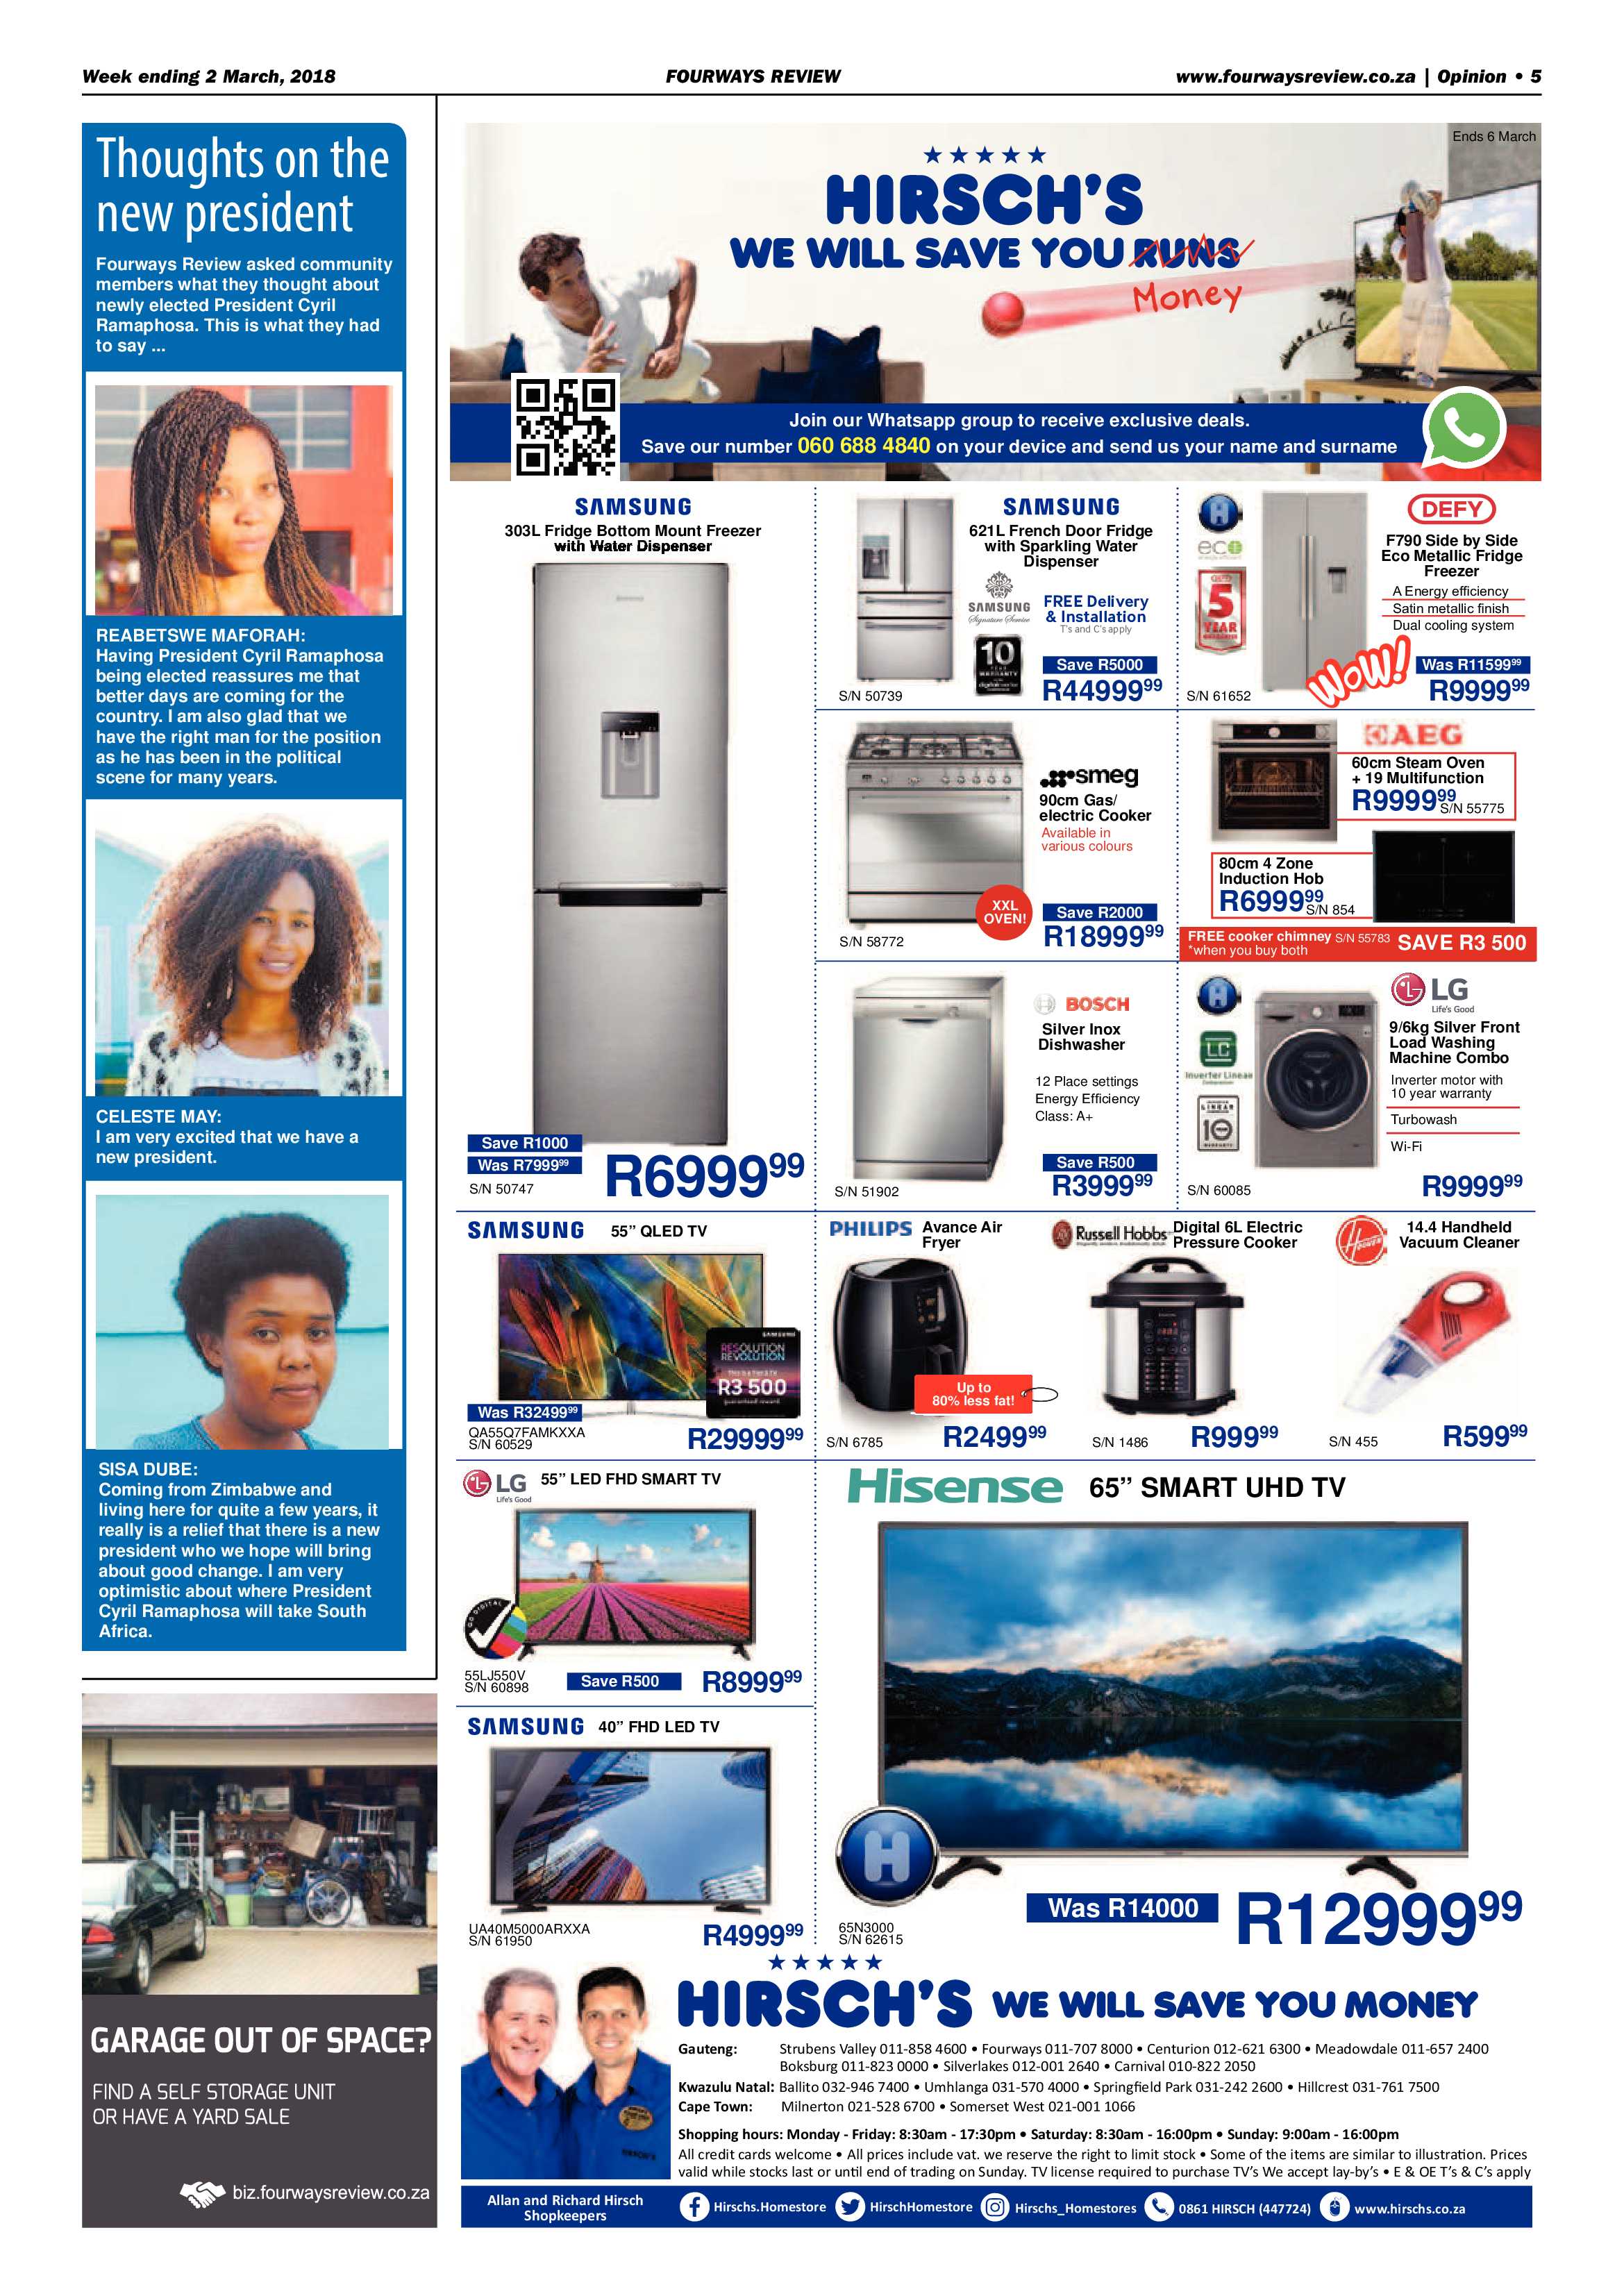 Fourways Review 3 March 2018 page 5